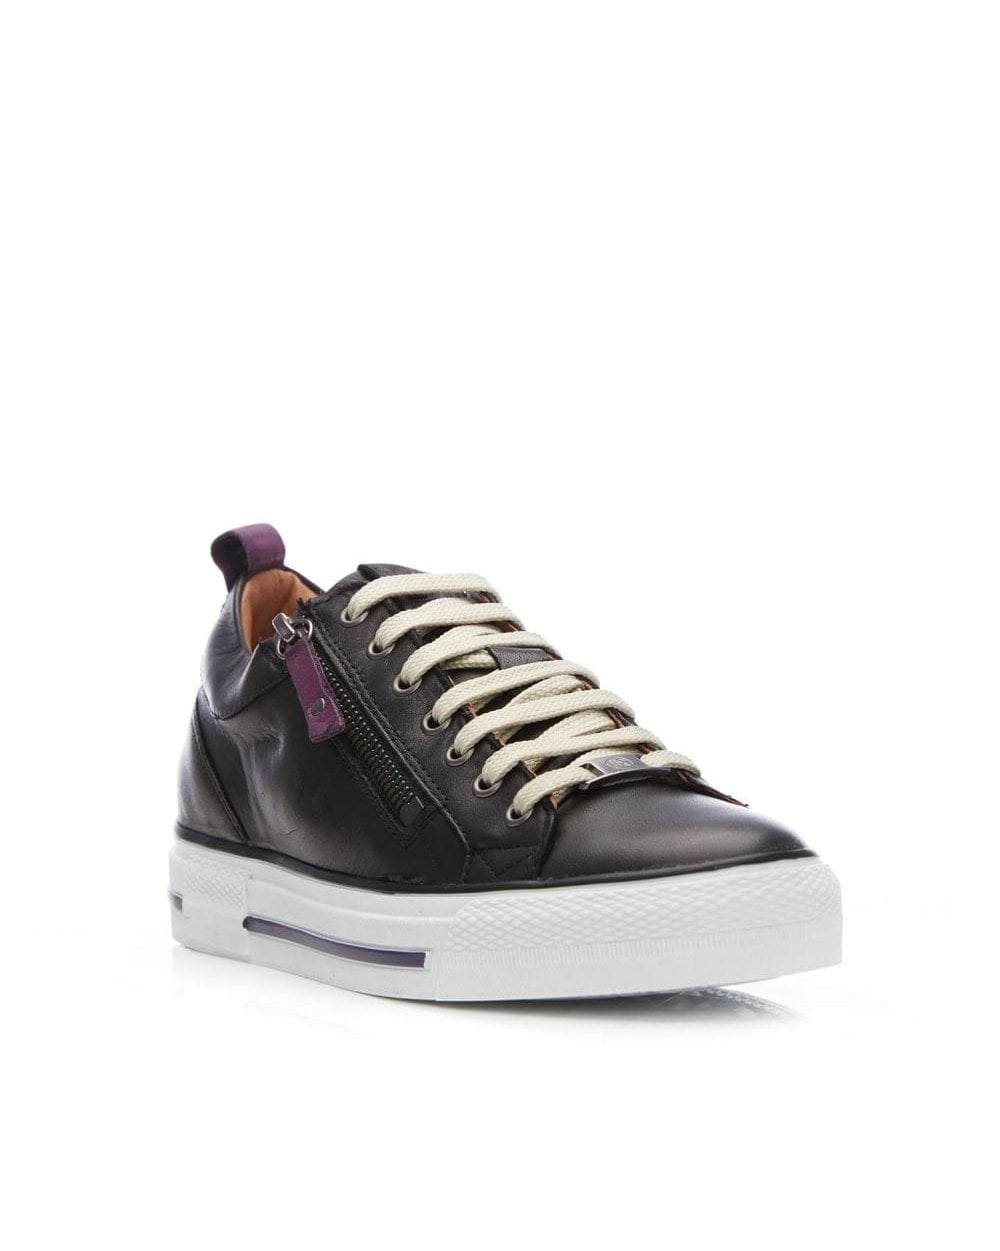 Brayleigh Leather Trainer